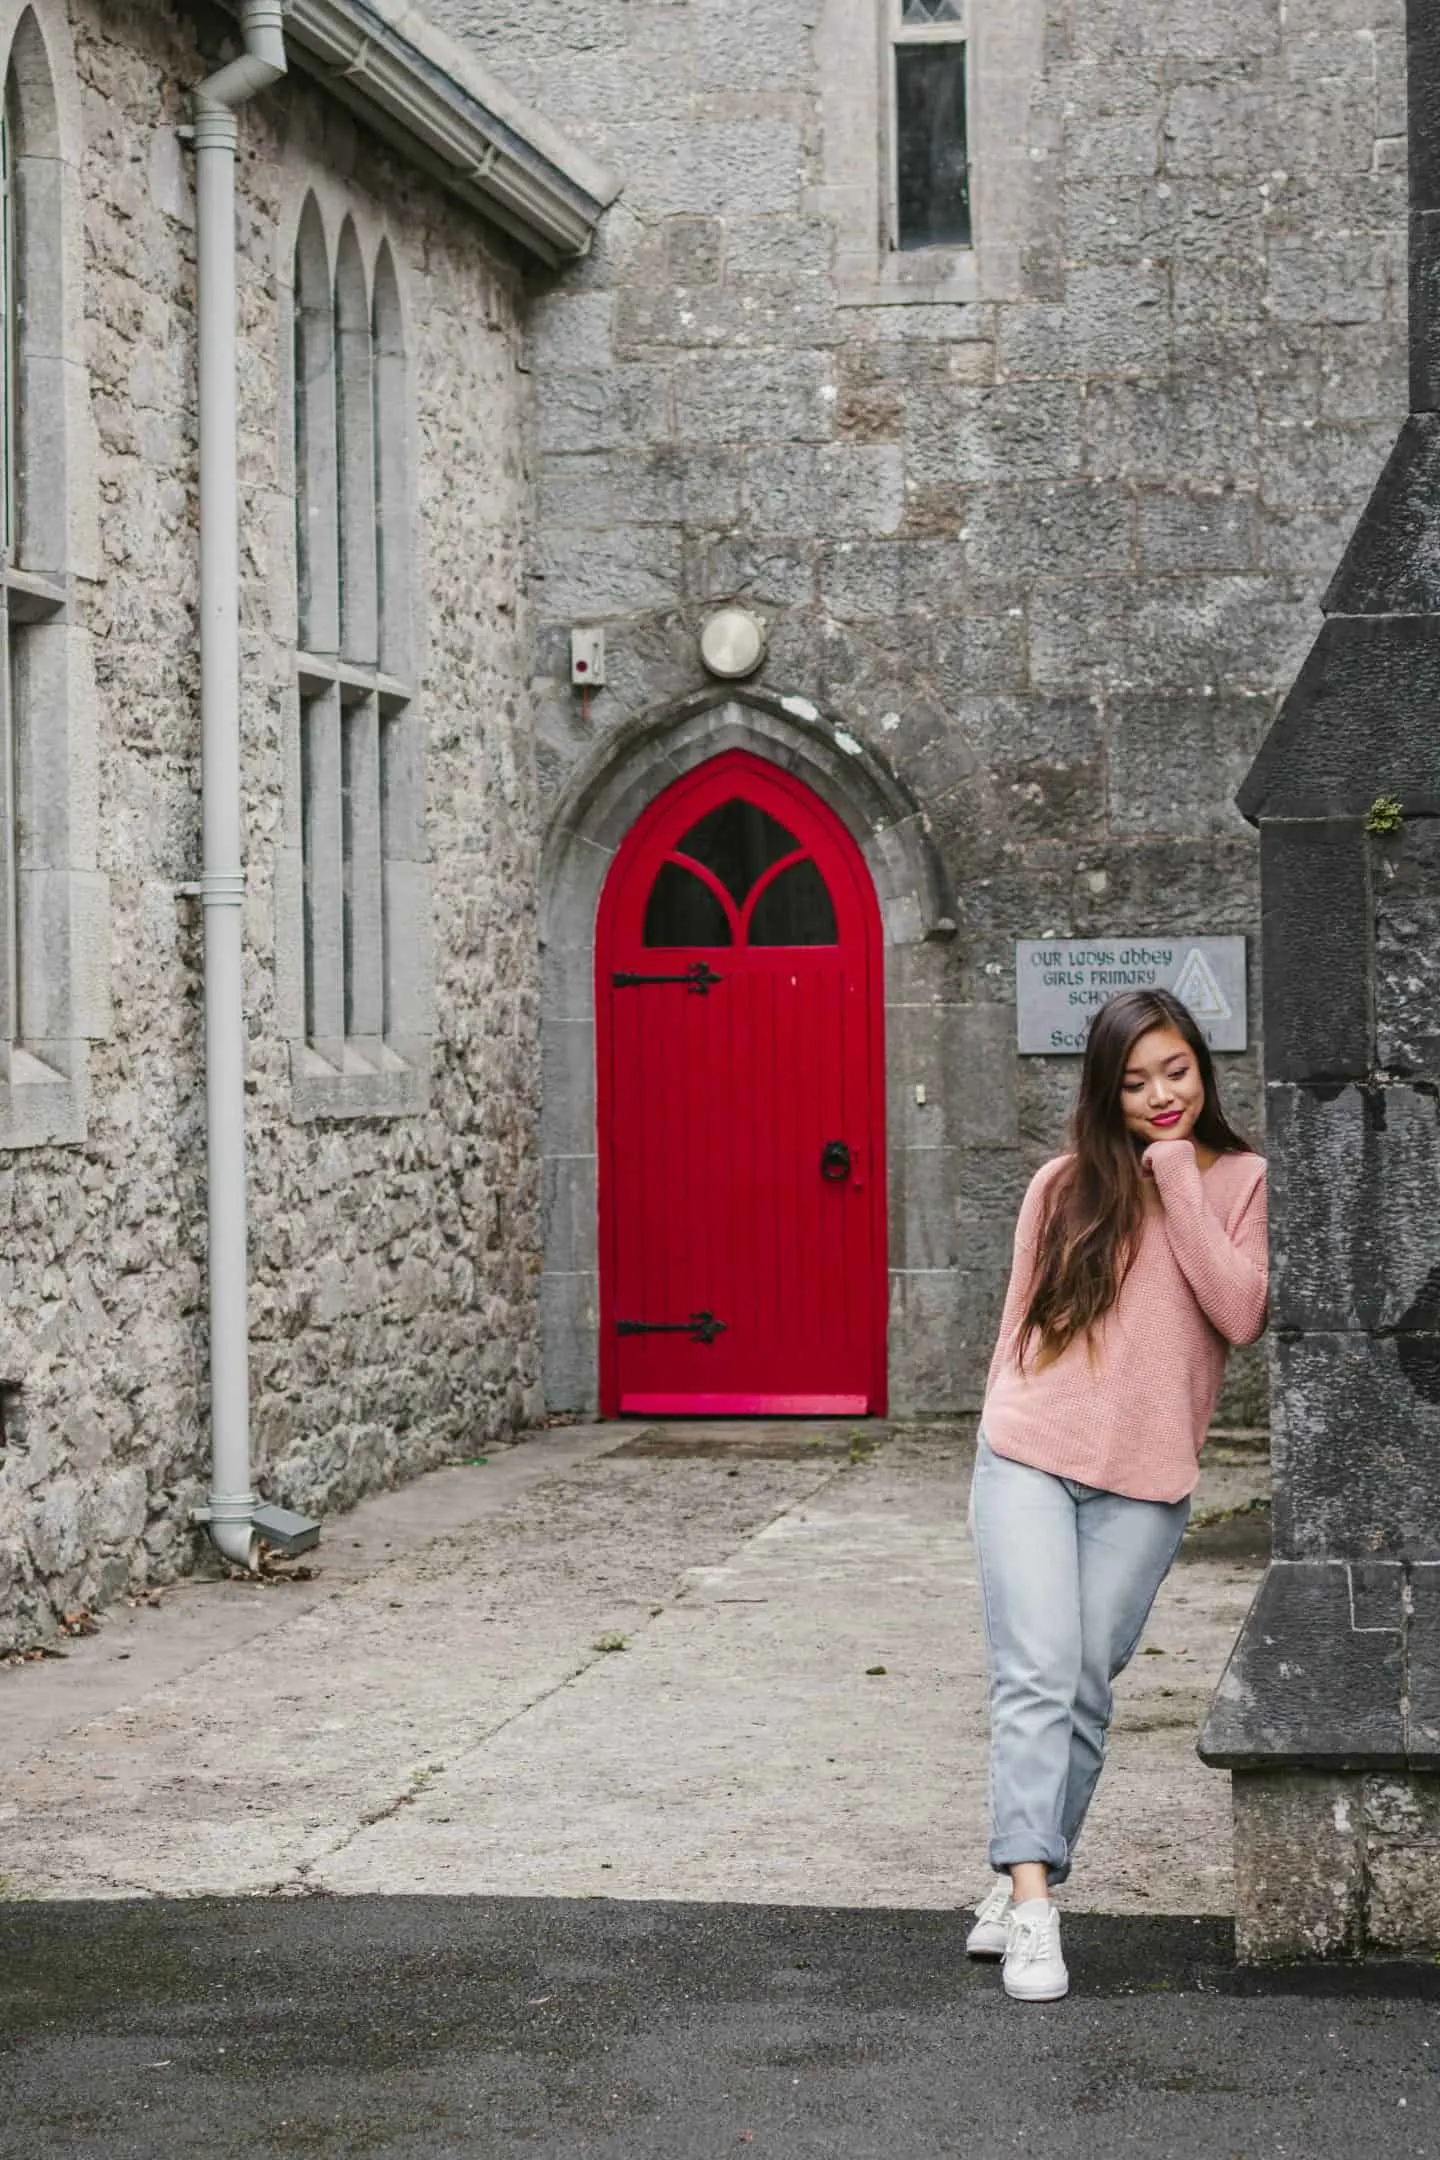 The Village of Adare is known as the prettiest town in Ireland